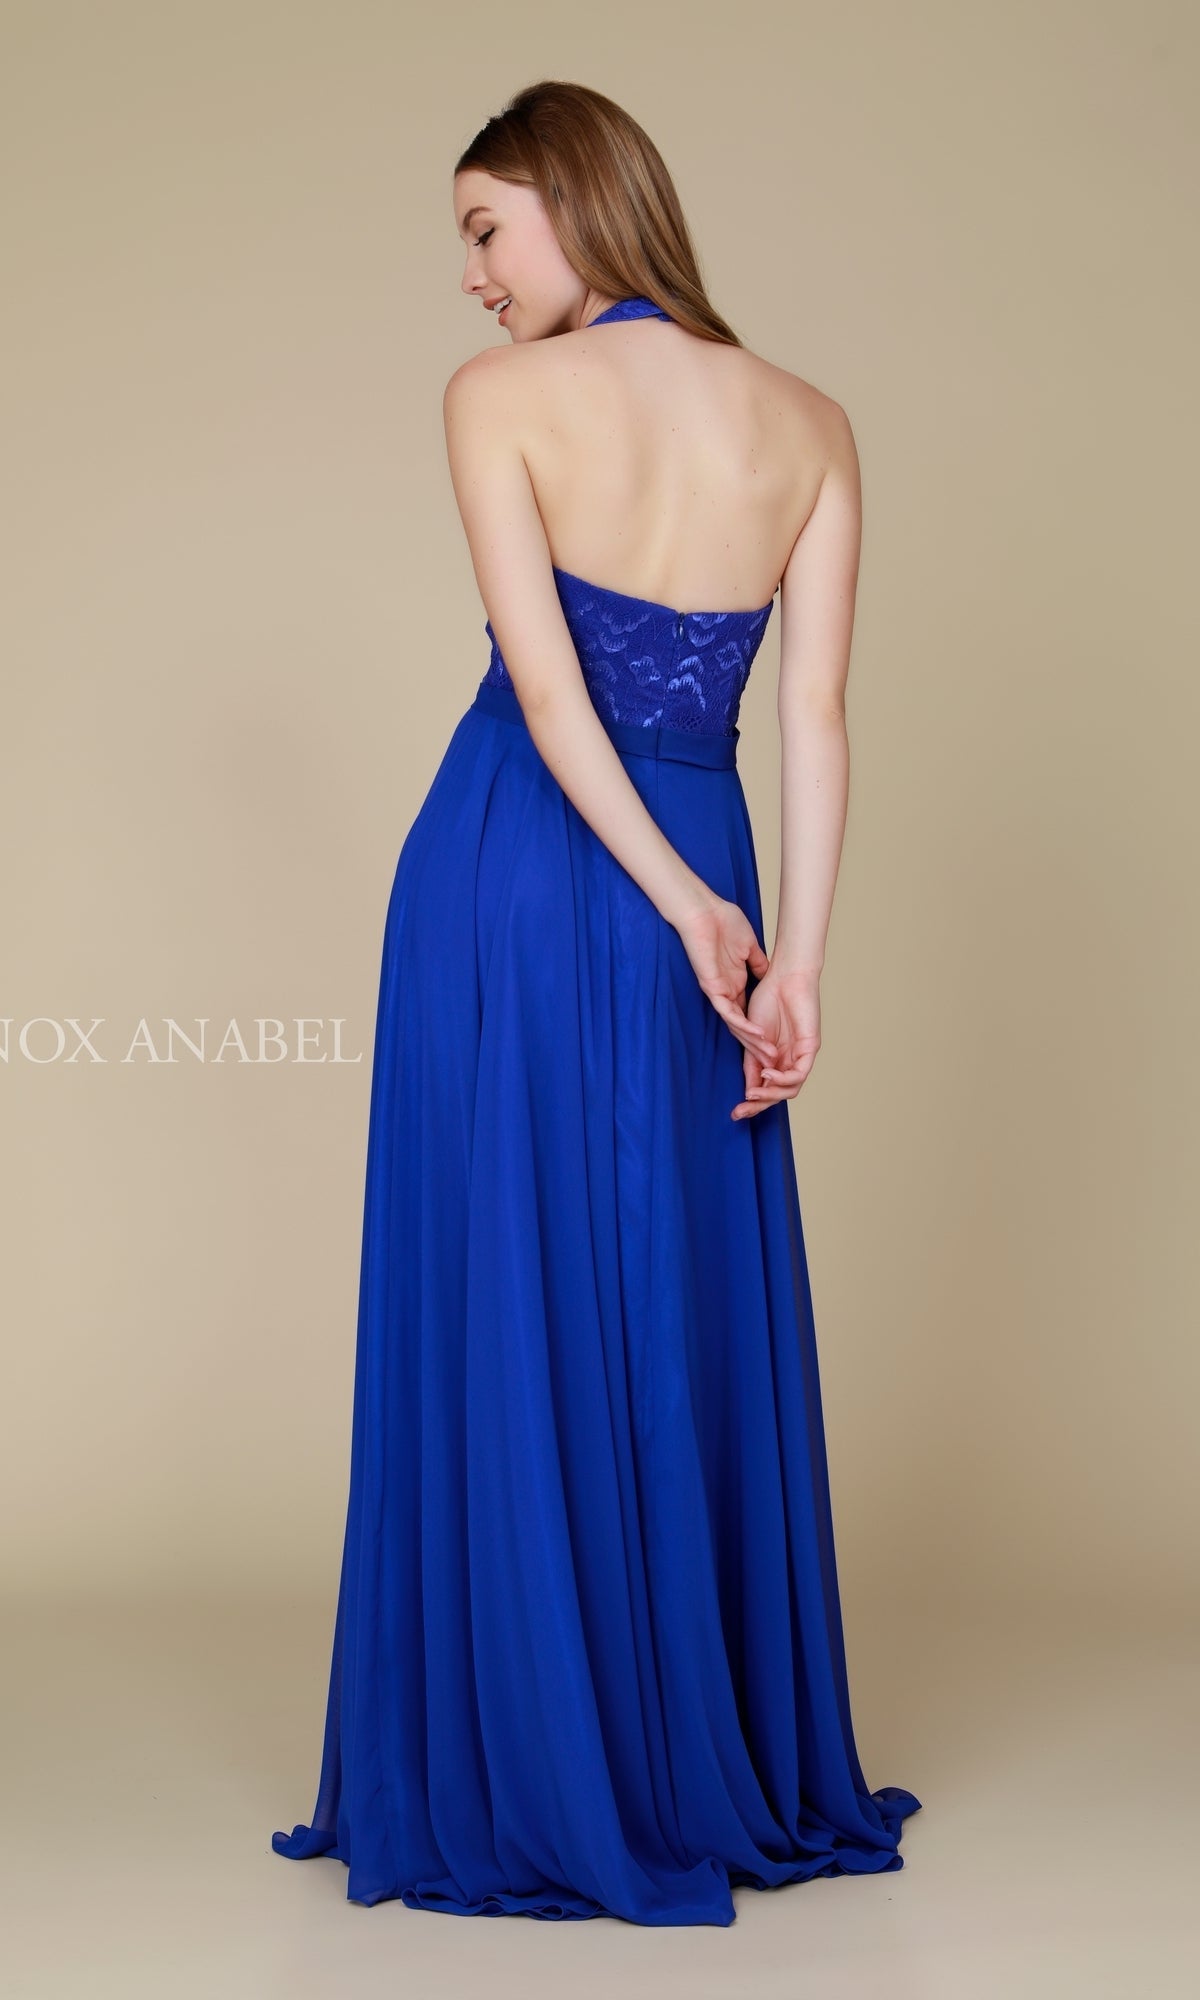  Long Formal Evening Gown With Lace Halter Top